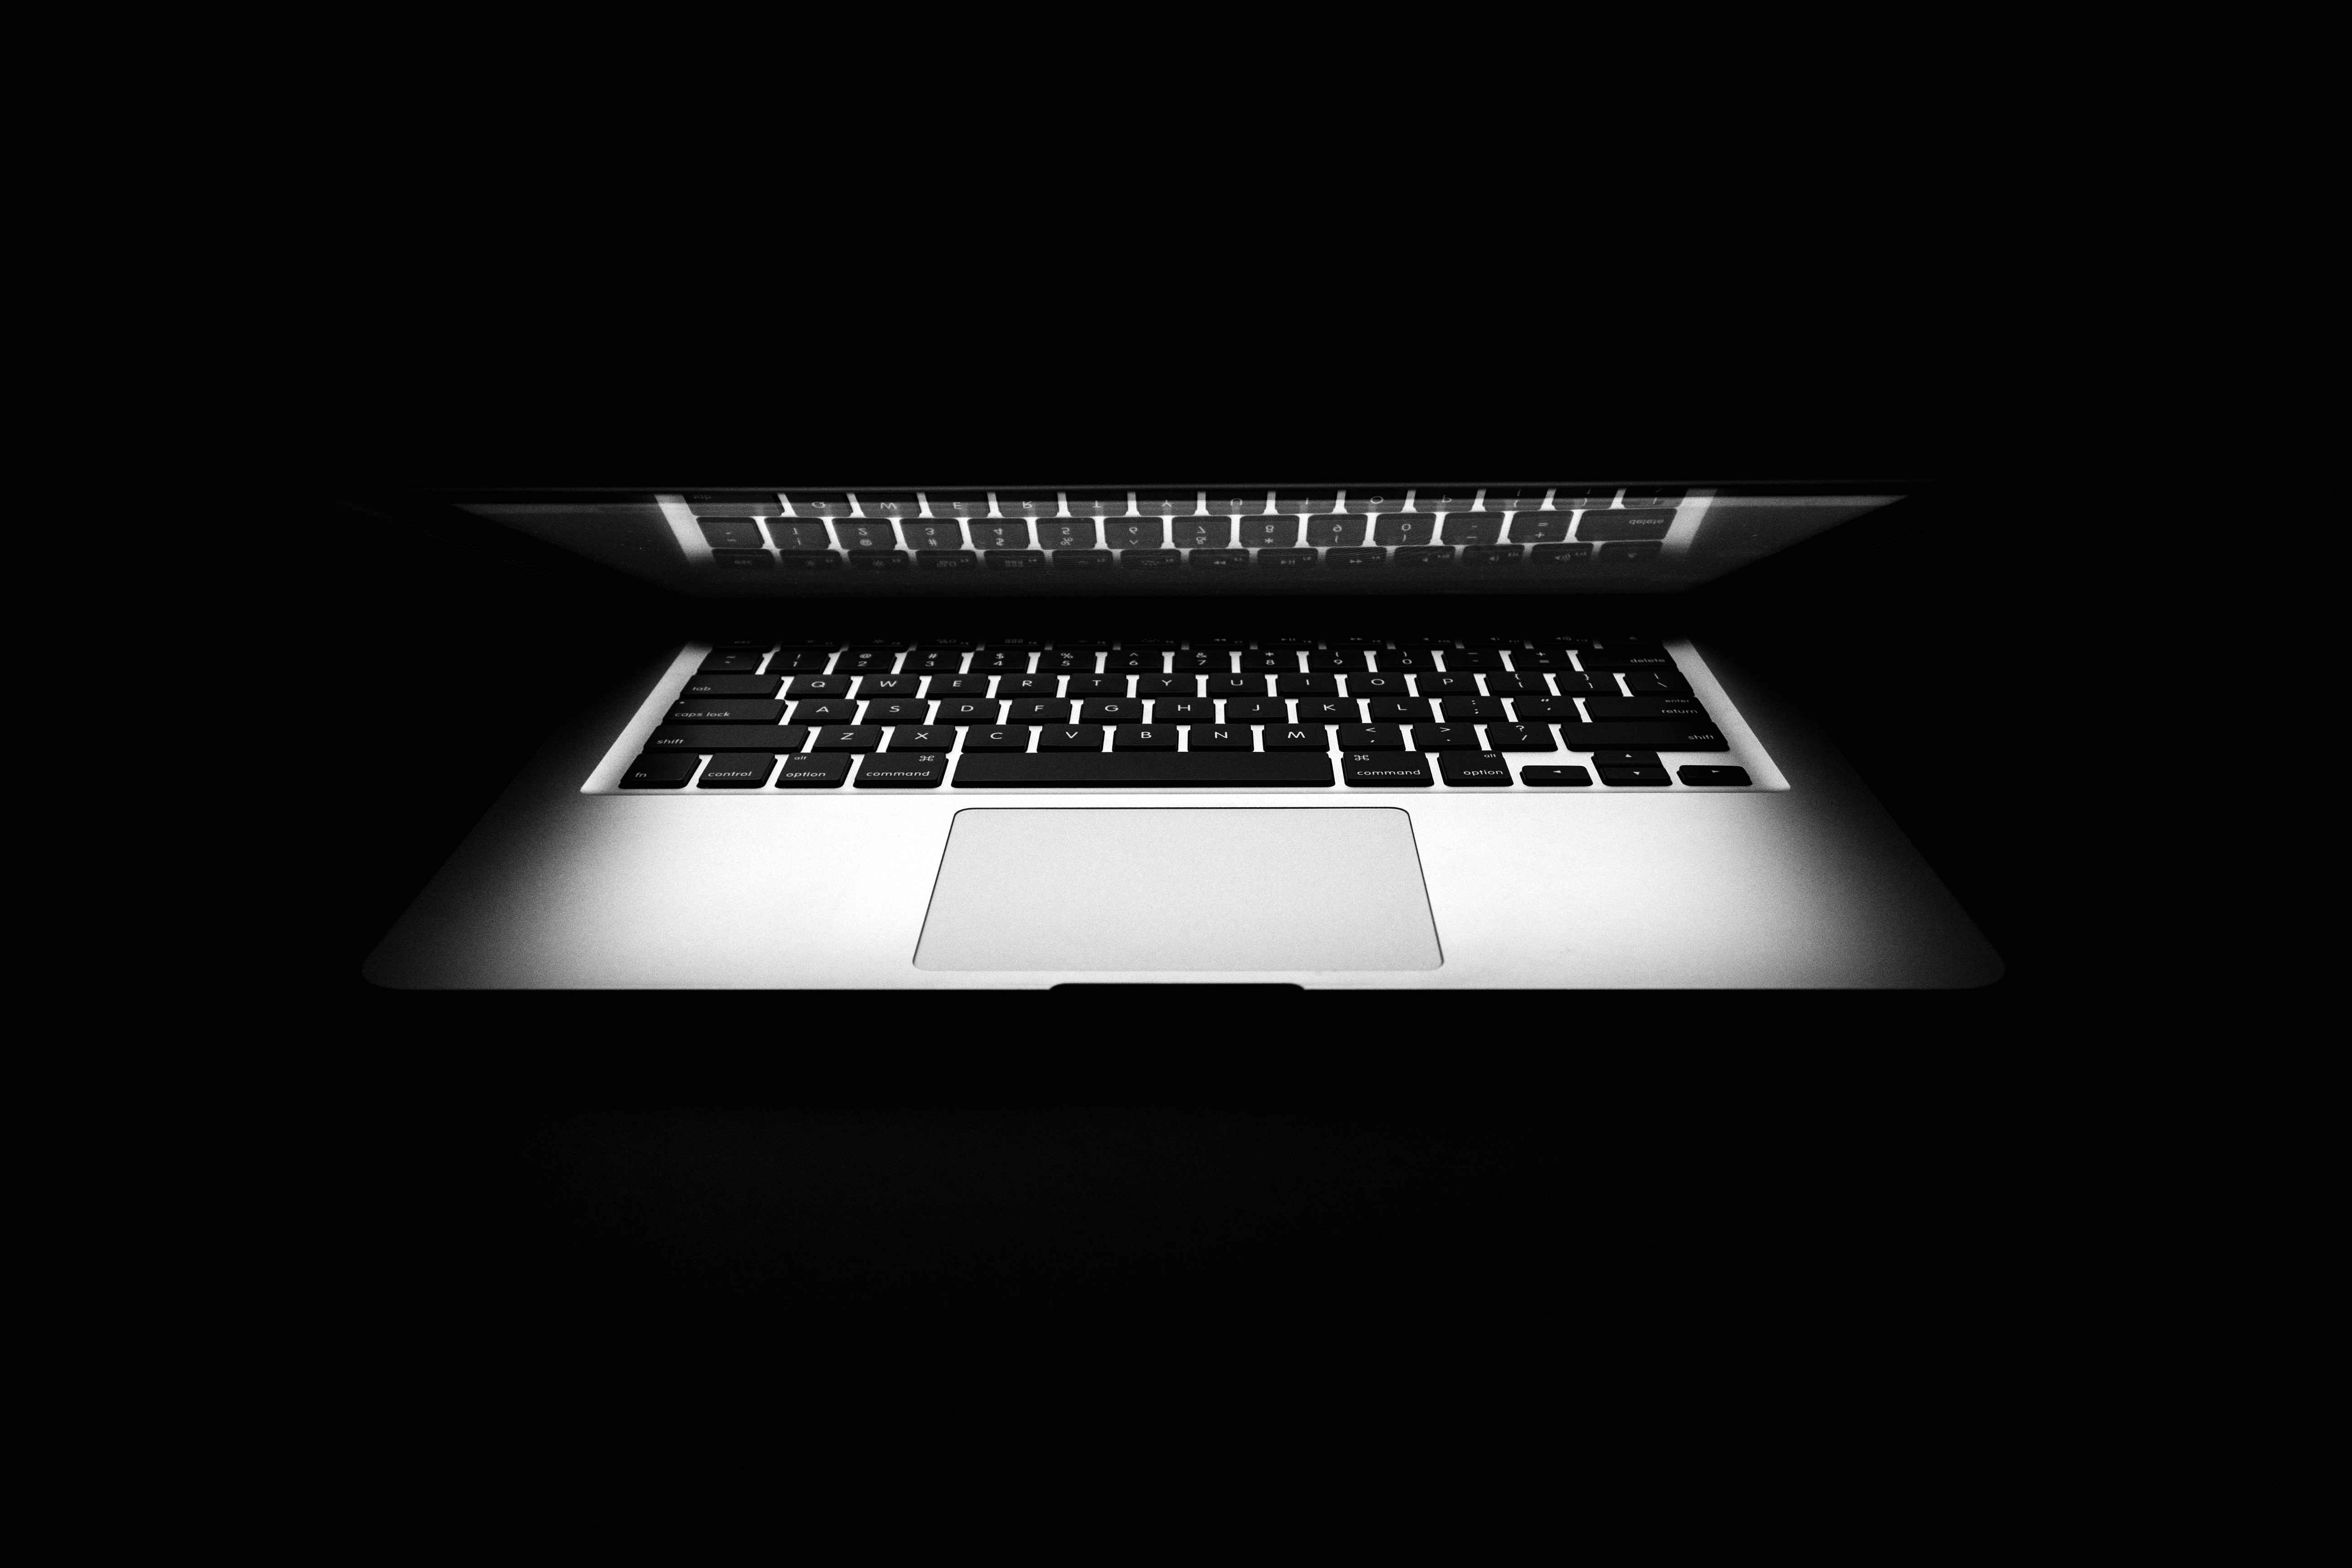 Macbook Kernel Panic: What It Means and How to Avoid It